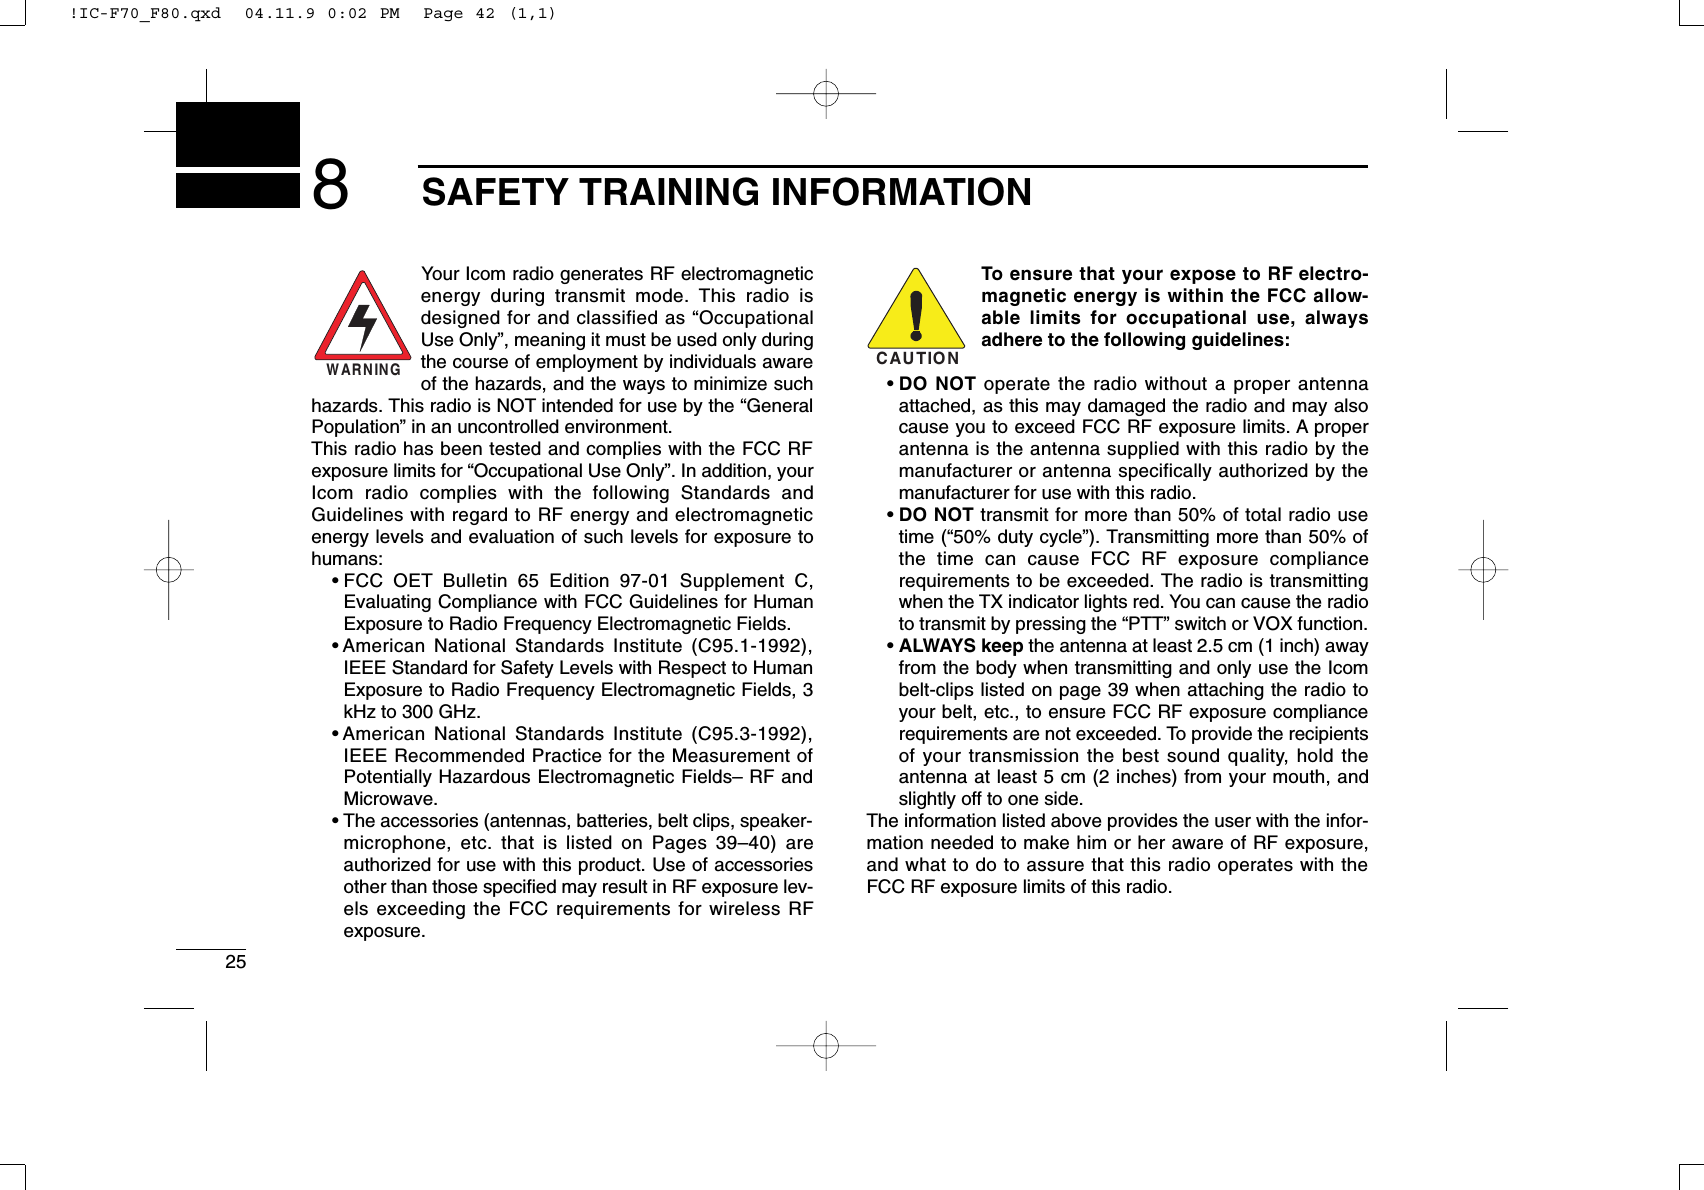 258SAFETYTRAINING INFORMATIONYour Icom radio generates RF electromagneticenergy during transmit mode. This radio isdesigned for and classified as “OccupationalUse Only”, meaning it must be used only duringthe course of employment by individuals awareof the hazards, and the ways to minimize suchhazards. This radio is NOT intended for use by the “GeneralPopulation” in an uncontrolled environment.This radio has been tested and complies with the FCC RFexposure limits for “Occupational Use Only”. In addition, yourIcom radio complies with the following Standards andGuidelines with regard to RF energy and electromagneticenergy levels and evaluation of such levels for exposure tohumans:• FCC OET Bulletin 65 Edition 97-01 Supplement C,Evaluating Compliance with FCC Guidelines for HumanExposure to Radio Frequency Electromagnetic Fields.• American National Standards Institute (C95.1-1992),IEEE Standard for Safety Levels with Respect to HumanExposure to Radio Frequency Electromagnetic Fields, 3kHz to 300 GHz.• American National Standards Institute (C95.3-1992),IEEE Recommended Practice for the Measurement ofPotentially Hazardous Electromagnetic Fields– RF andMicrowave.• The accessories (antennas, batteries, belt clips, speaker-microphone, etc. that is listed on Pages 39–40) areauthorized for use with this product. Use of accessoriesother than those speciﬁed may result in RF exposure lev-els exceeding the FCC requirements for wireless RFexposure.To ensure that your expose to RF electro-magnetic energy is within the FCC allow-able limits for occupational use, alwaysadhere to the following guidelines:• DO NOT operate the radio without a proper antennaattached, as this may damaged the radio and may alsocause you to exceed FCC RF exposure limits. A properantenna is the antenna supplied with this radio by themanufacturer or antenna specifically authorized by themanufacturer for use with this radio.• DO NOT transmit for more than 50% of total radio usetime (“50% duty cycle”). Transmitting more than 50% ofthe time can cause FCC RF exposure compliancerequirements to be exceeded. The radio is transmittingwhen the TX indicator lights red. You can cause the radioto transmit by pressing the “PTT” switch or VOX function.• ALWAYS keep the antenna at least 2.5 cm (1 inch) awayfrom the body when transmitting and only use the Icombelt-clips listed on page 39 when attaching the radio toyour belt, etc., to ensure FCC RF exposure compliancerequirements are not exceeded. To provide the recipientsof your transmission the best sound quality, hold theantenna at least 5 cm (2 inches) from your mouth, andslightly off to one side.The information listed above provides the user with the infor-mation needed to make him or her aware of RF exposure,and what to do to assure that this radio operates with theFCC RF exposure limits of this radio.CAUTIONWARNING!IC-F70_F80.qxd  04.11.9 0:02 PM  Page 42 (1,1)